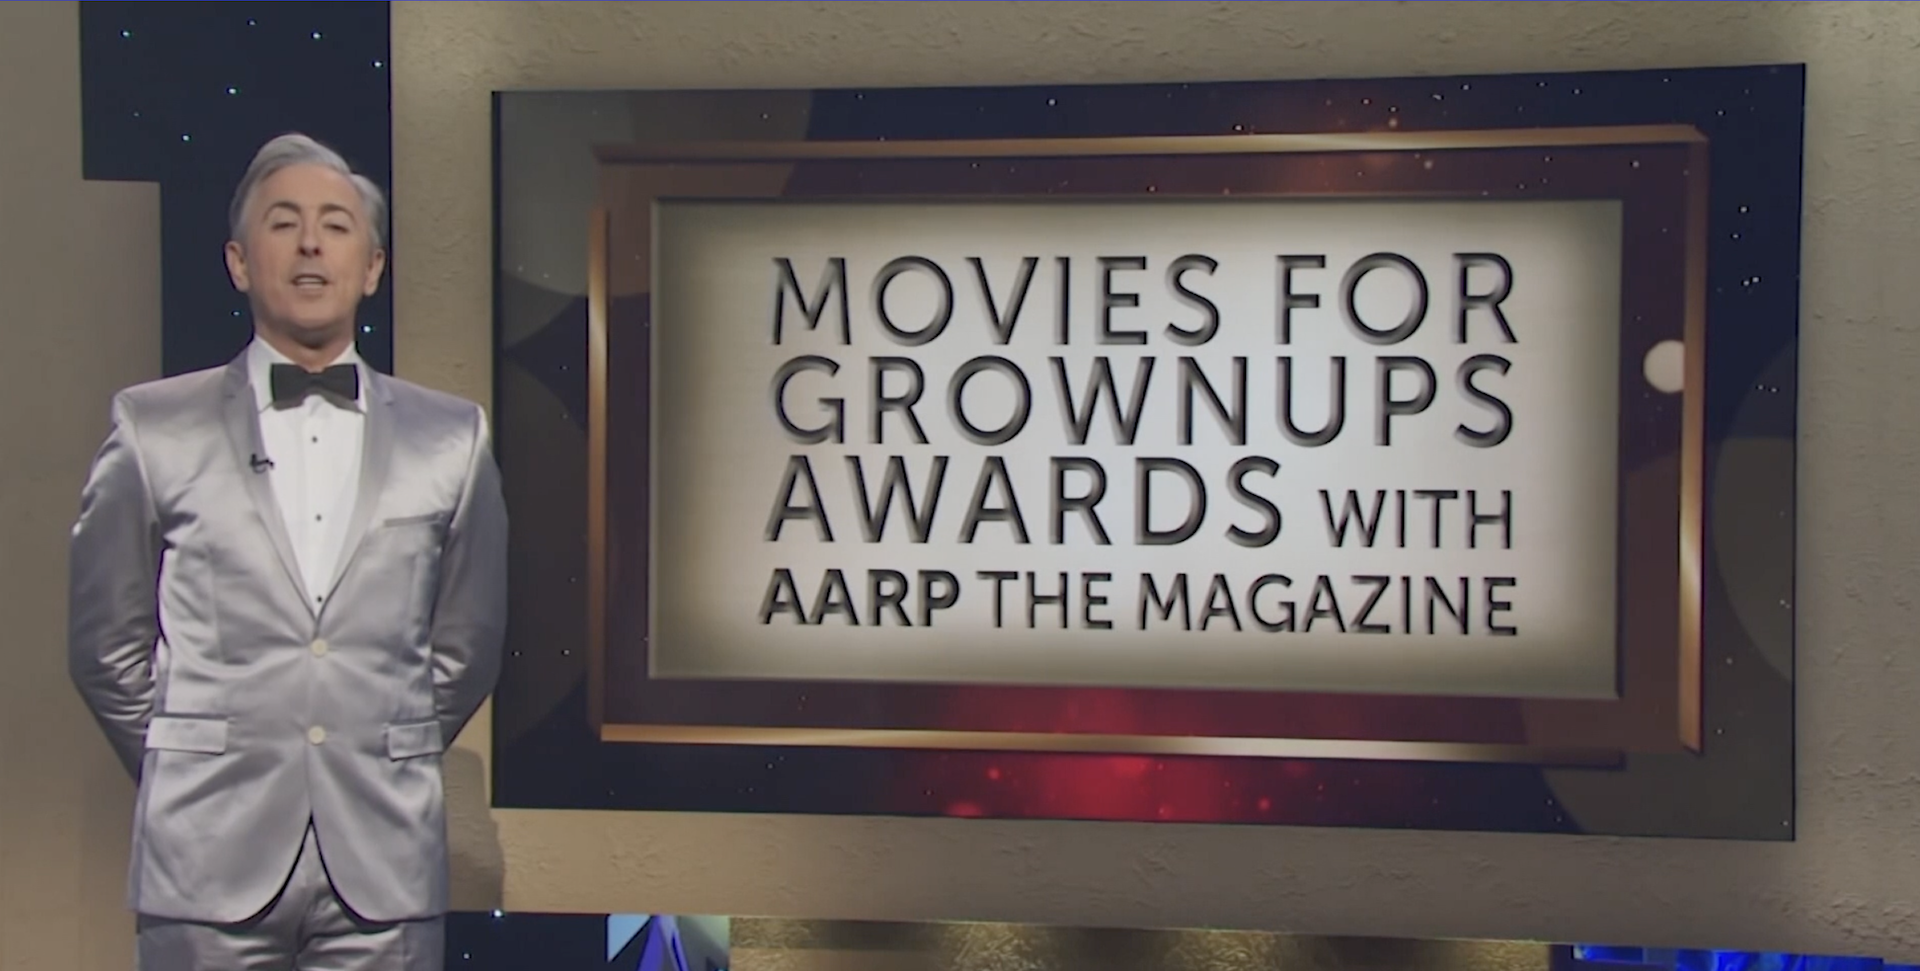 Movies for Grownups Awards 2023 with AARP the Magazine